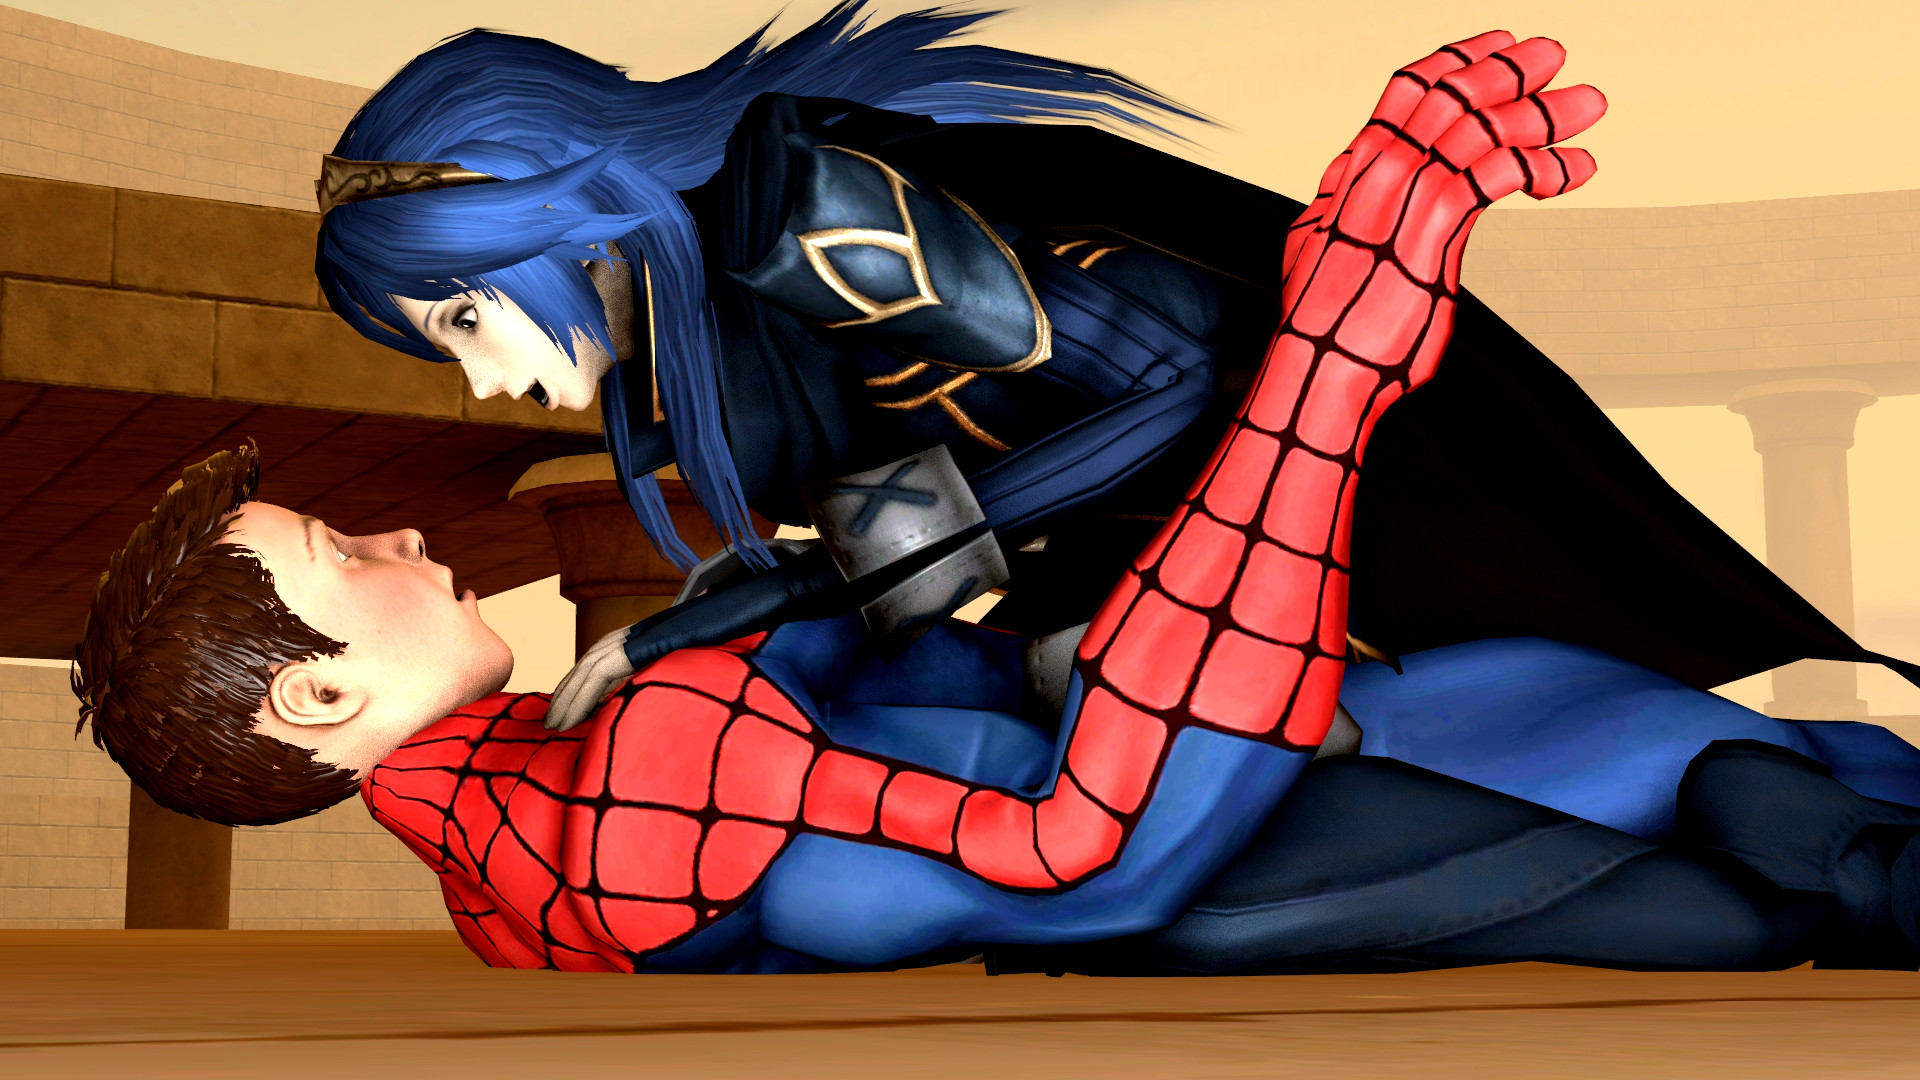 Lucina and Spider-Man: where are your going cutie? by kongzillarex619.